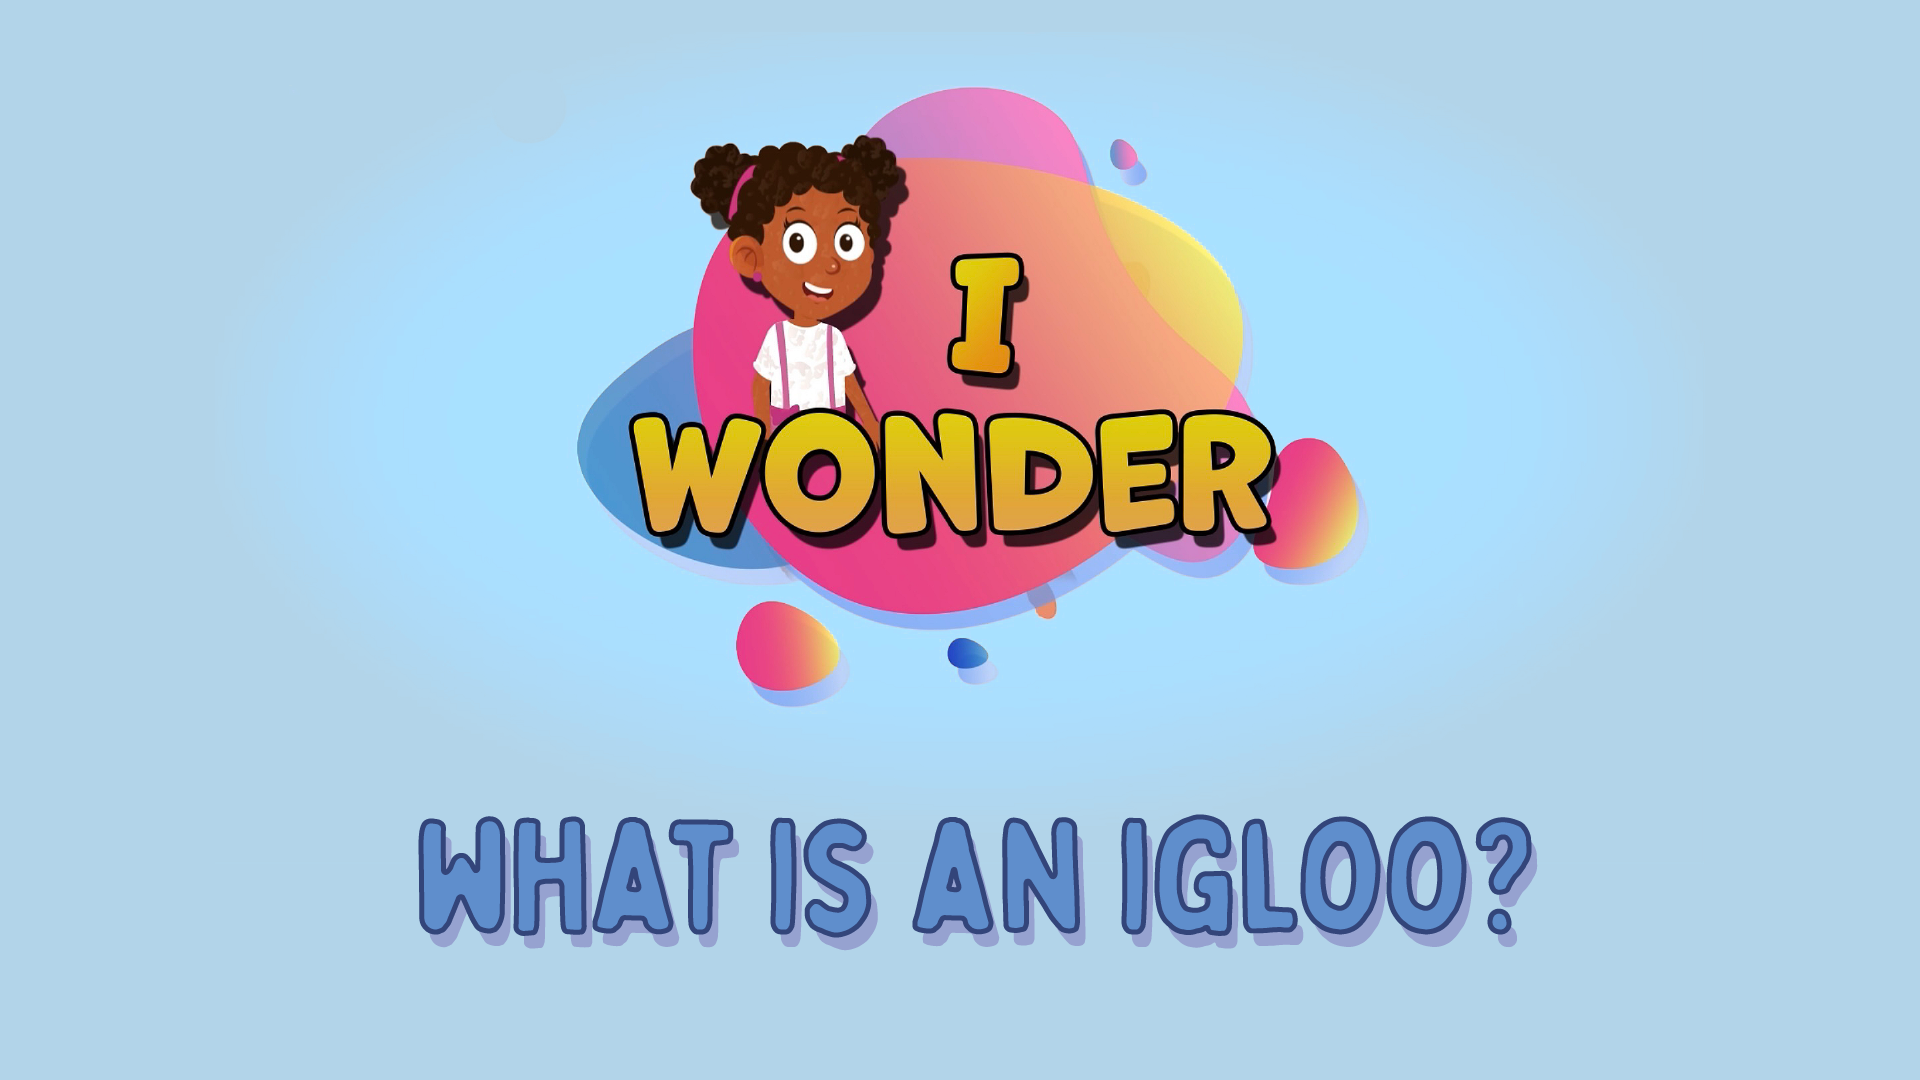 What Is An Igloo?